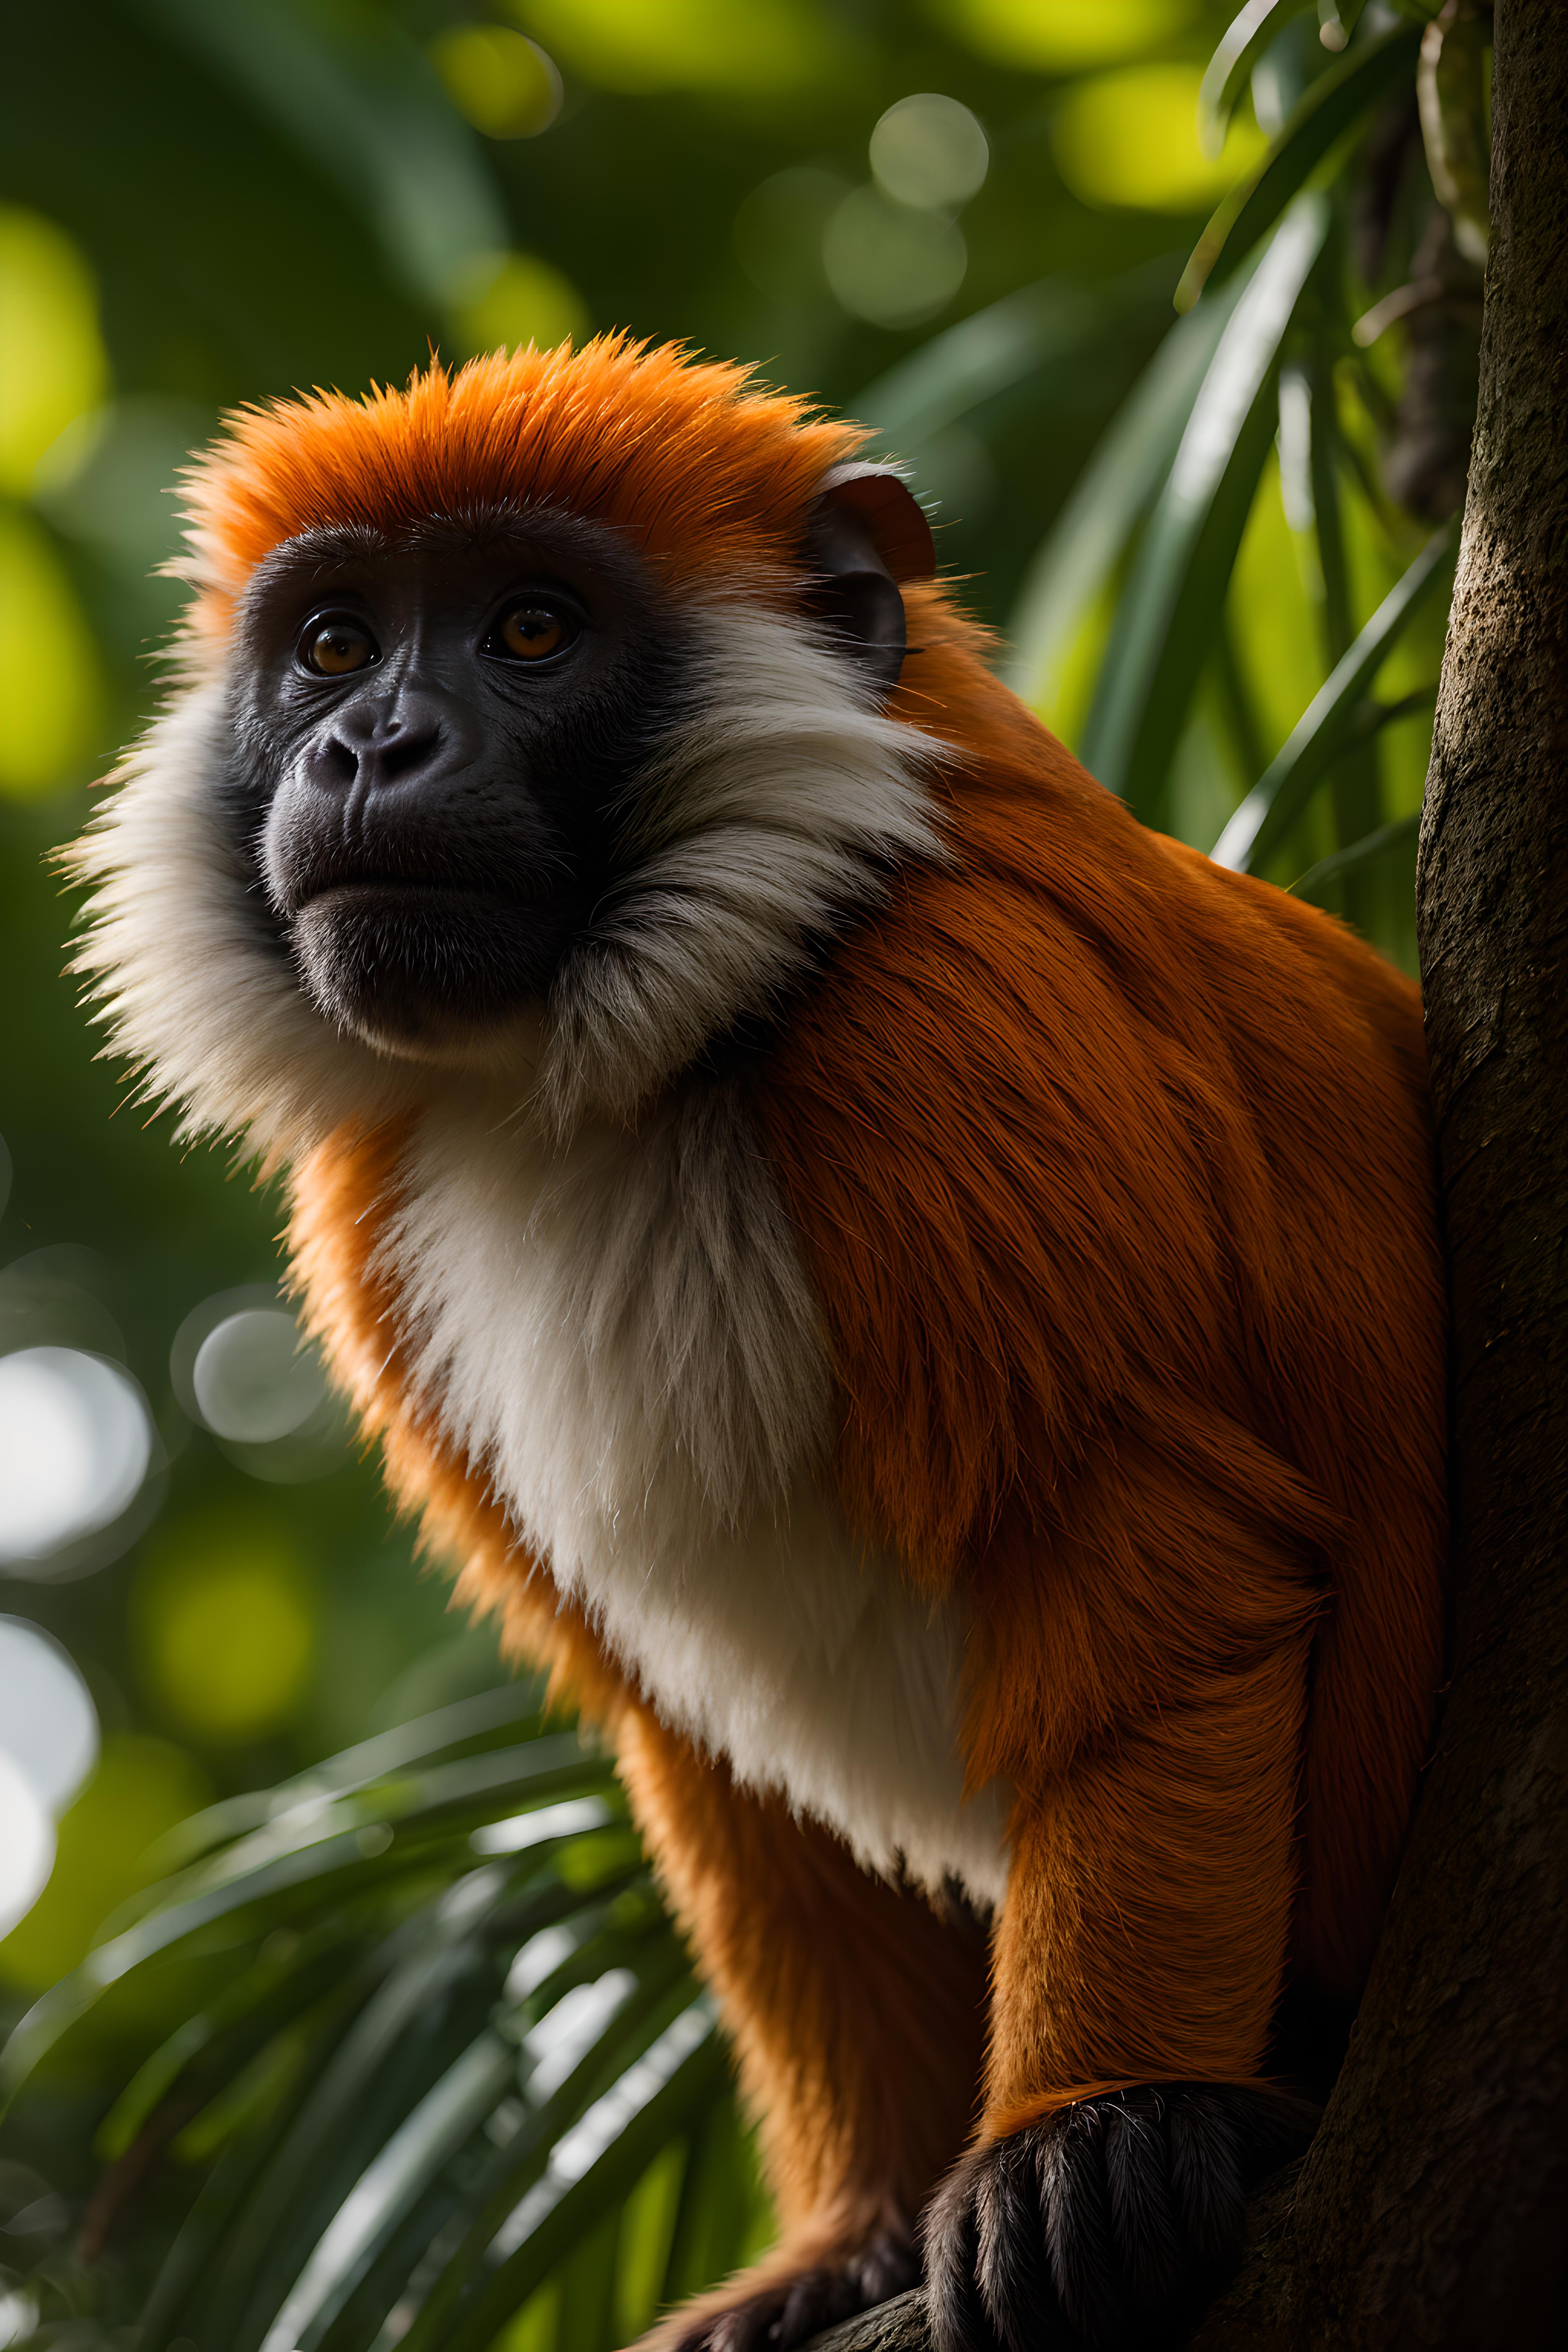 A red and white monkey with a big nose and large black eyes sitting in a tree.